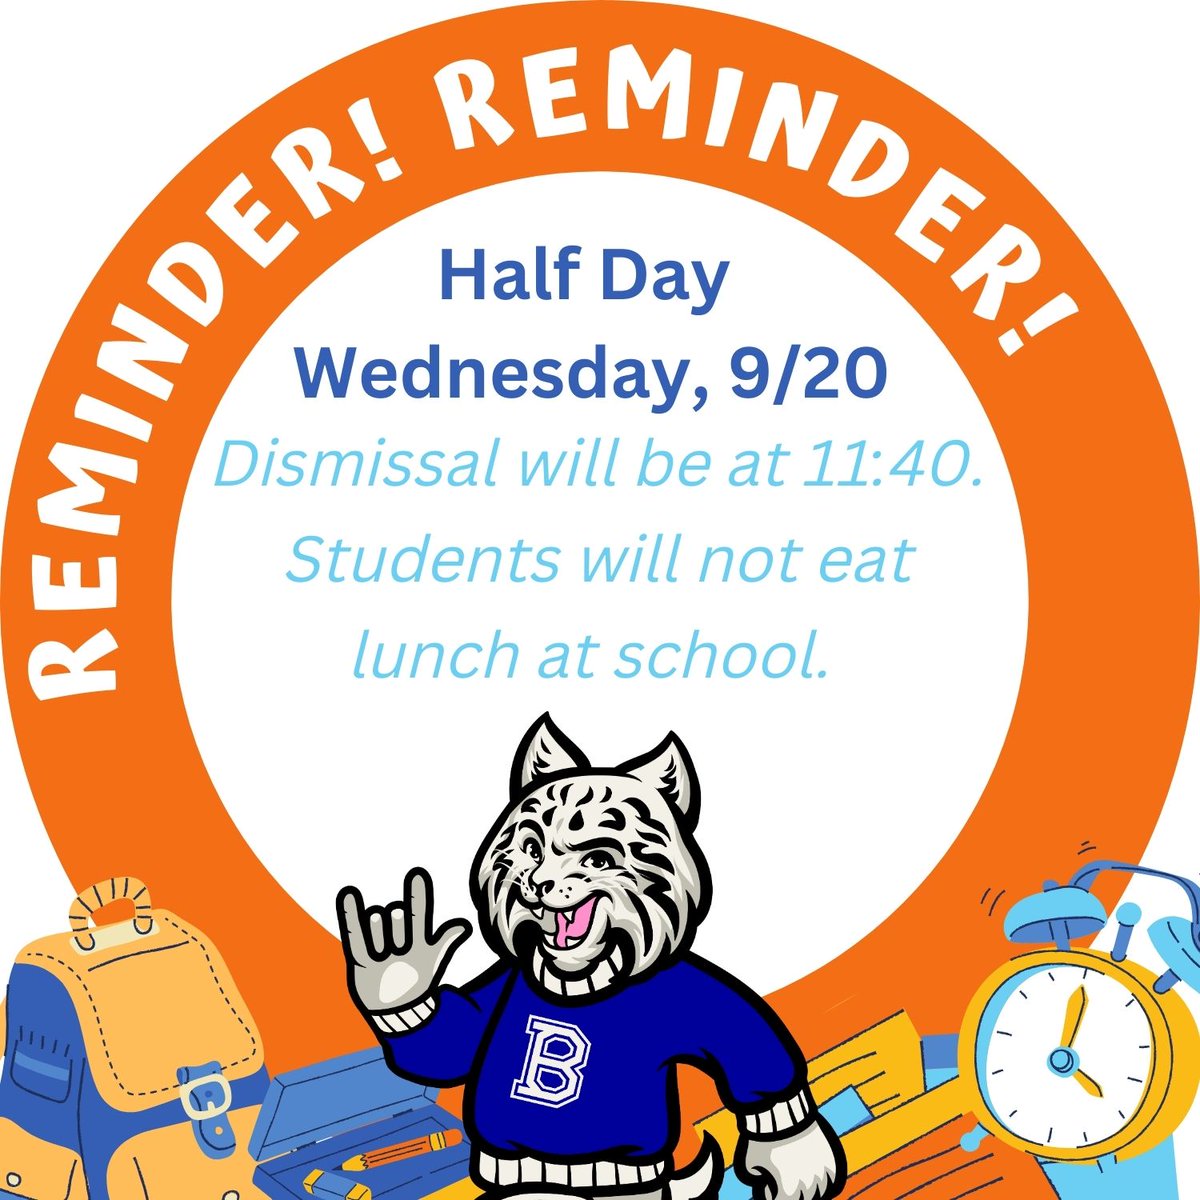 Hi Bobcats! Friendly reminder that there will be a half day next Wednesday, 9/20. 💙, Bobby